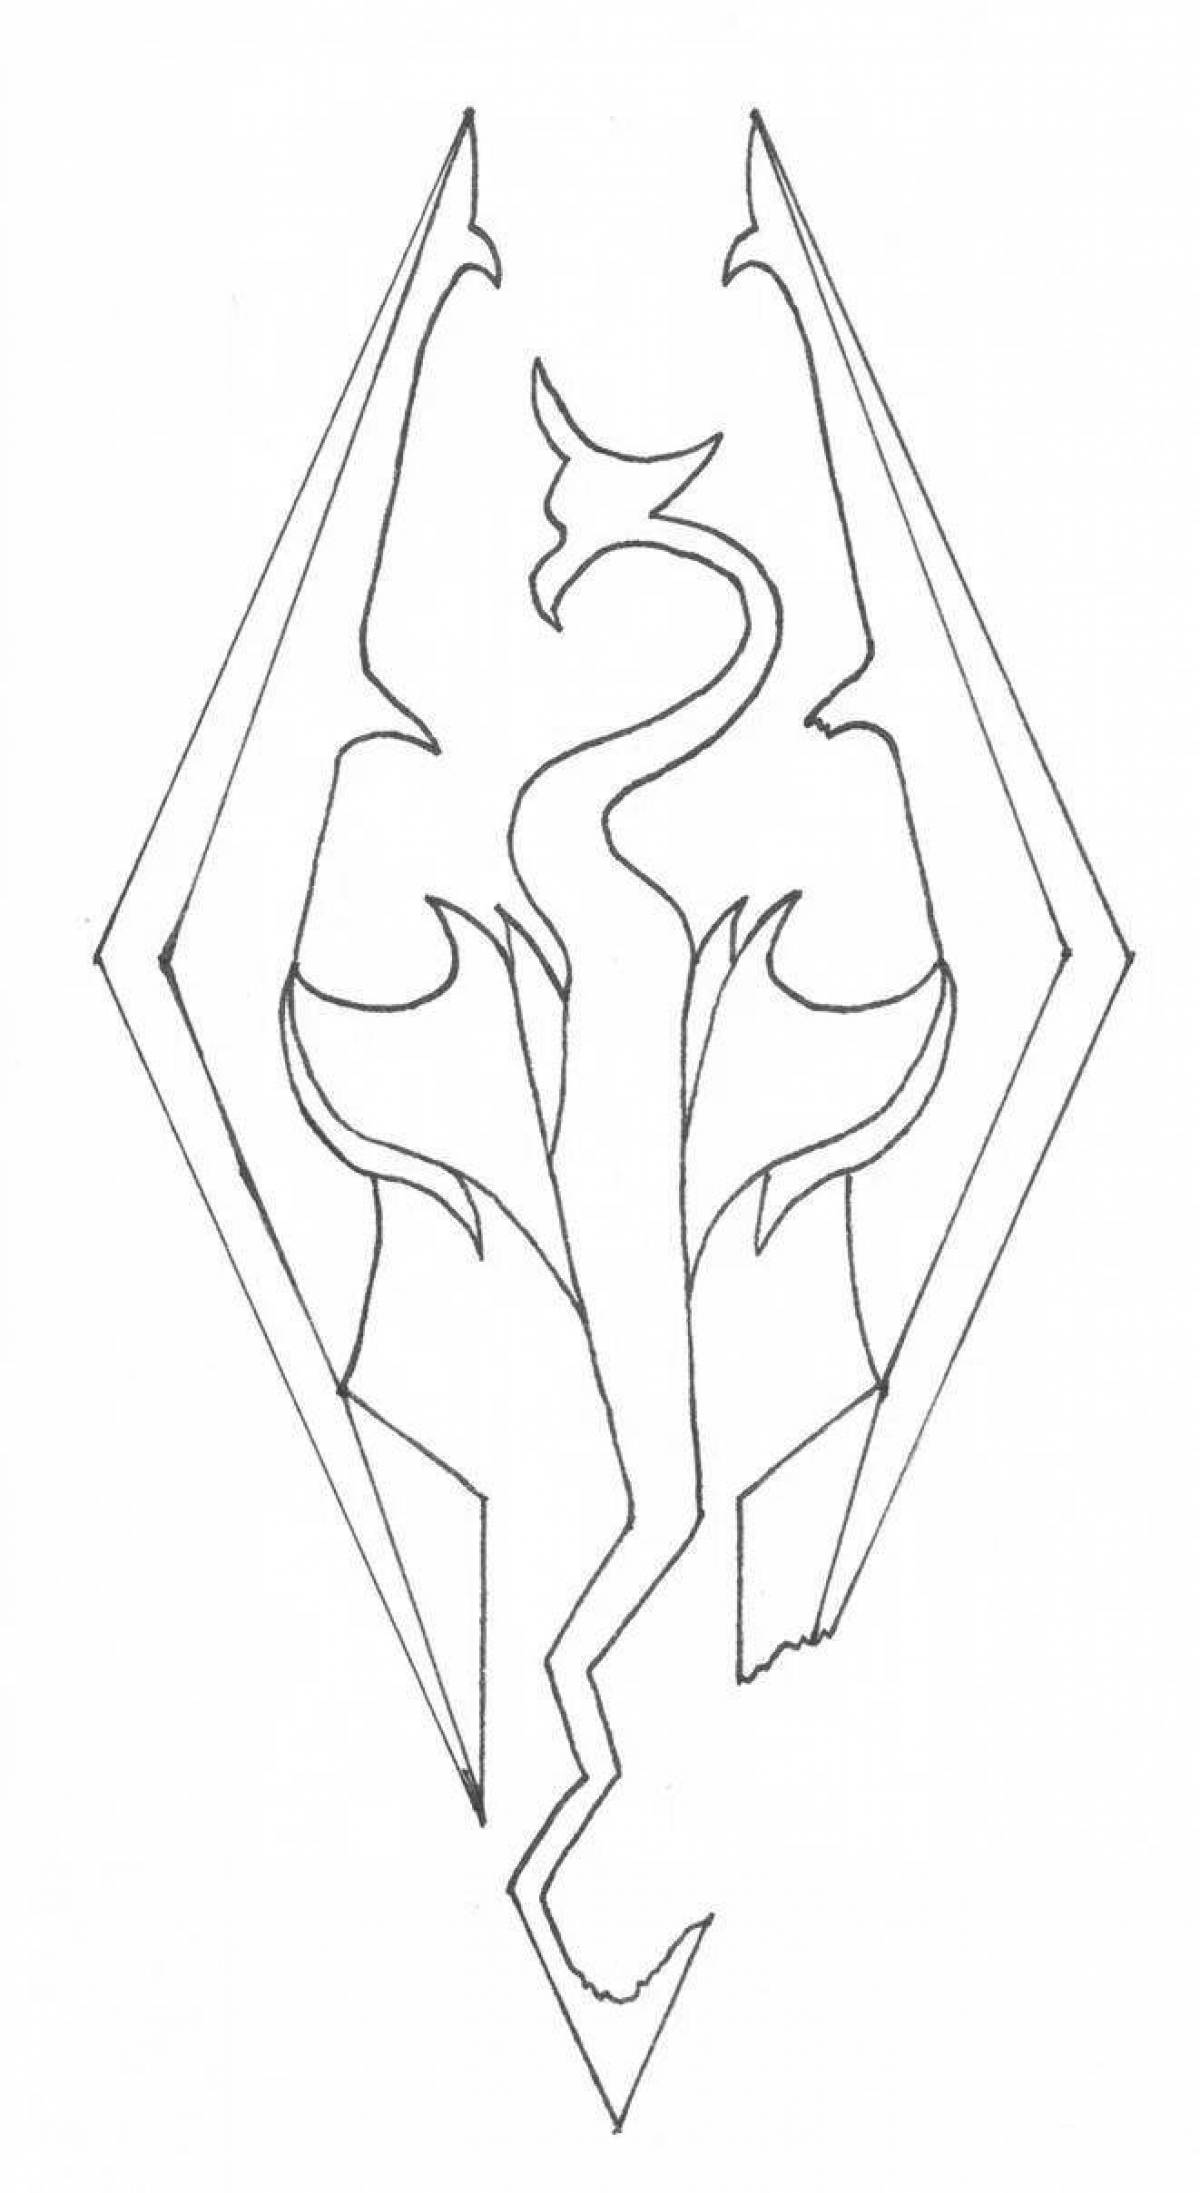 Great skyrim coloring page